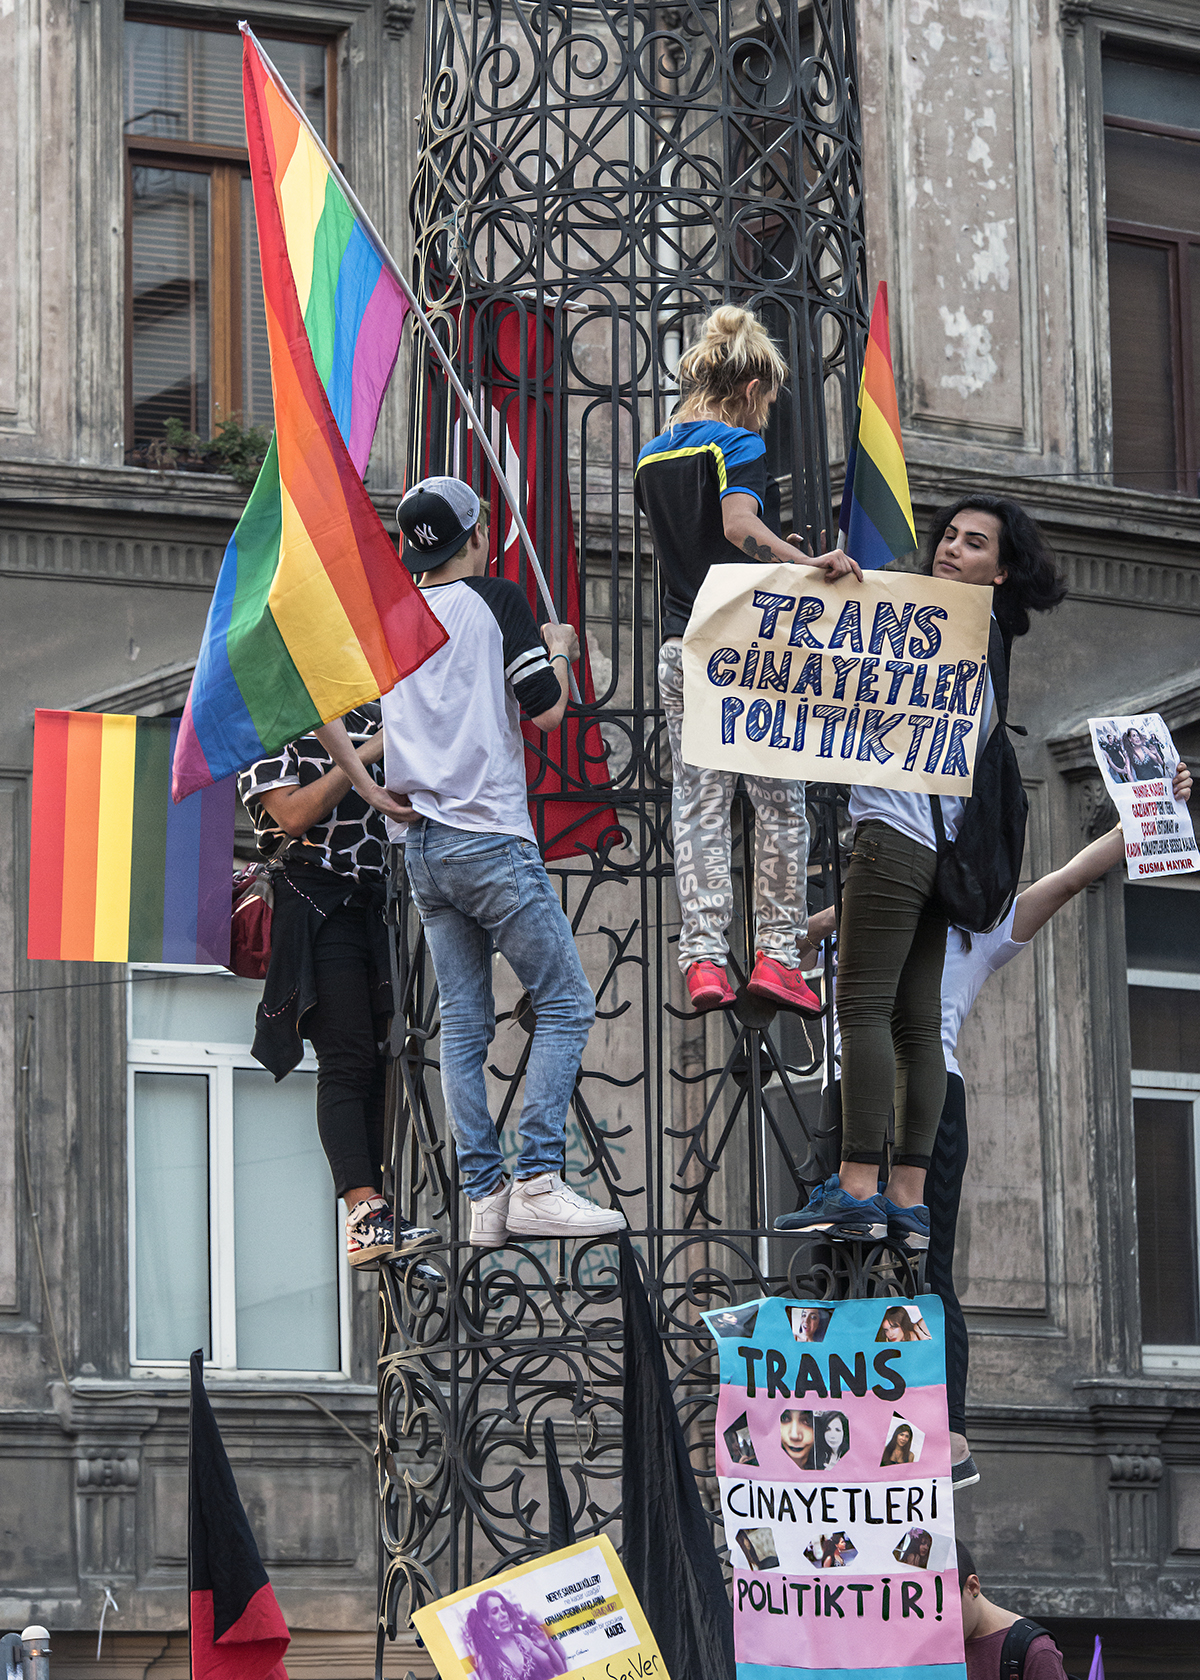 Day 234 —Beyoğlu - 
The LGBT lobby declare “We will walk on Galatasaray Square, we want justice for murdered transgender victim Hande Kader.”  
